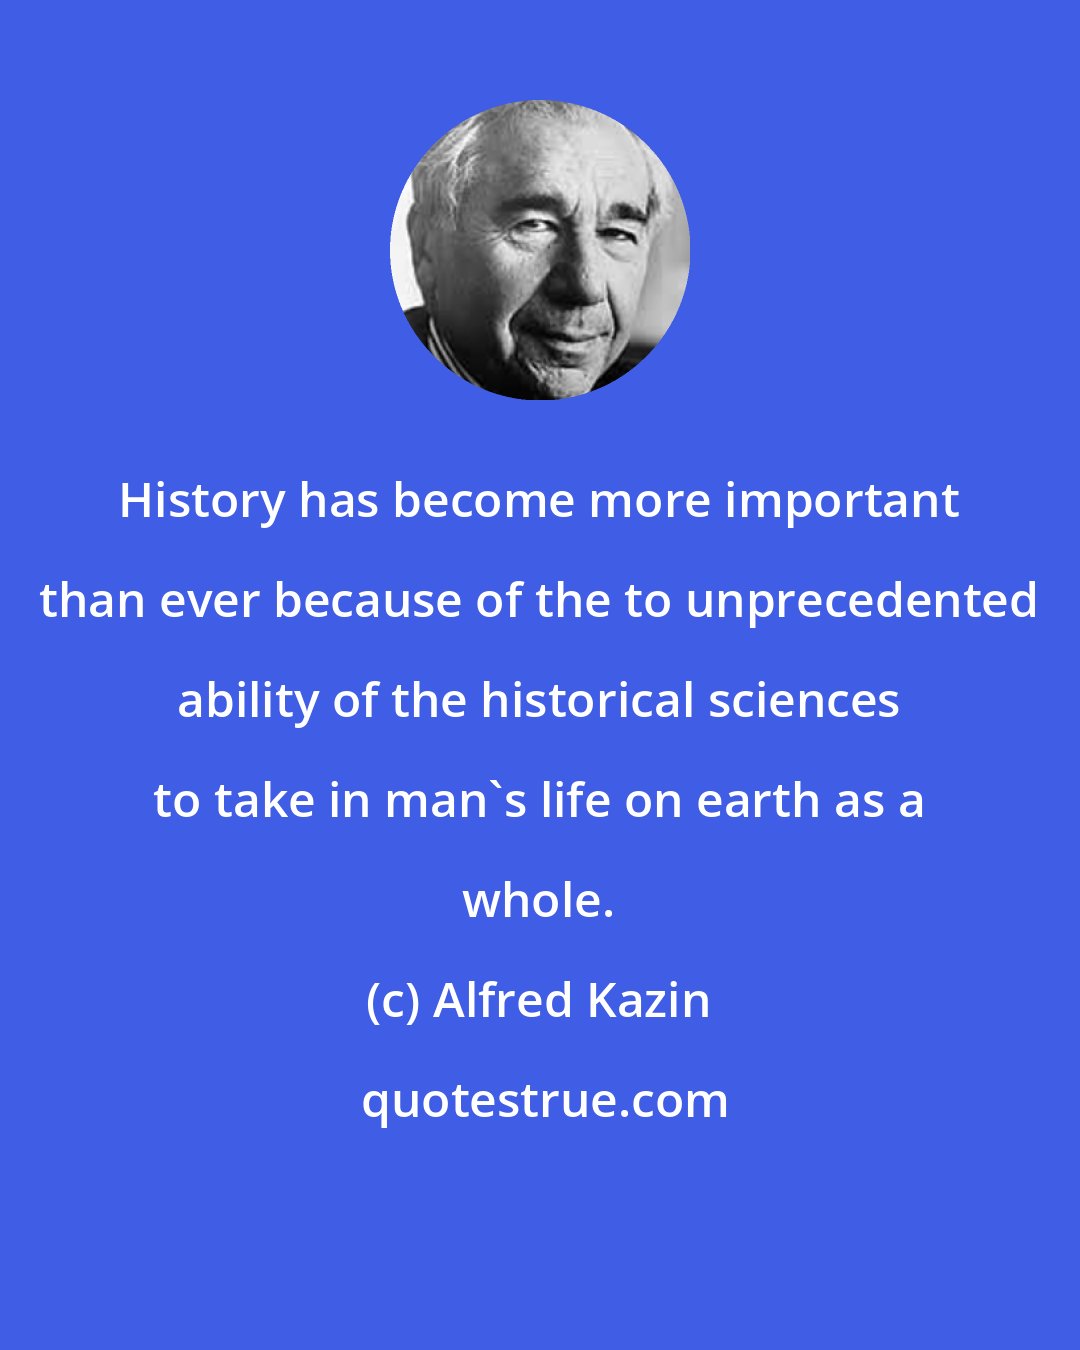 Alfred Kazin: History has become more important than ever because of the to unprecedented ability of the historical sciences to take in man's life on earth as a whole.